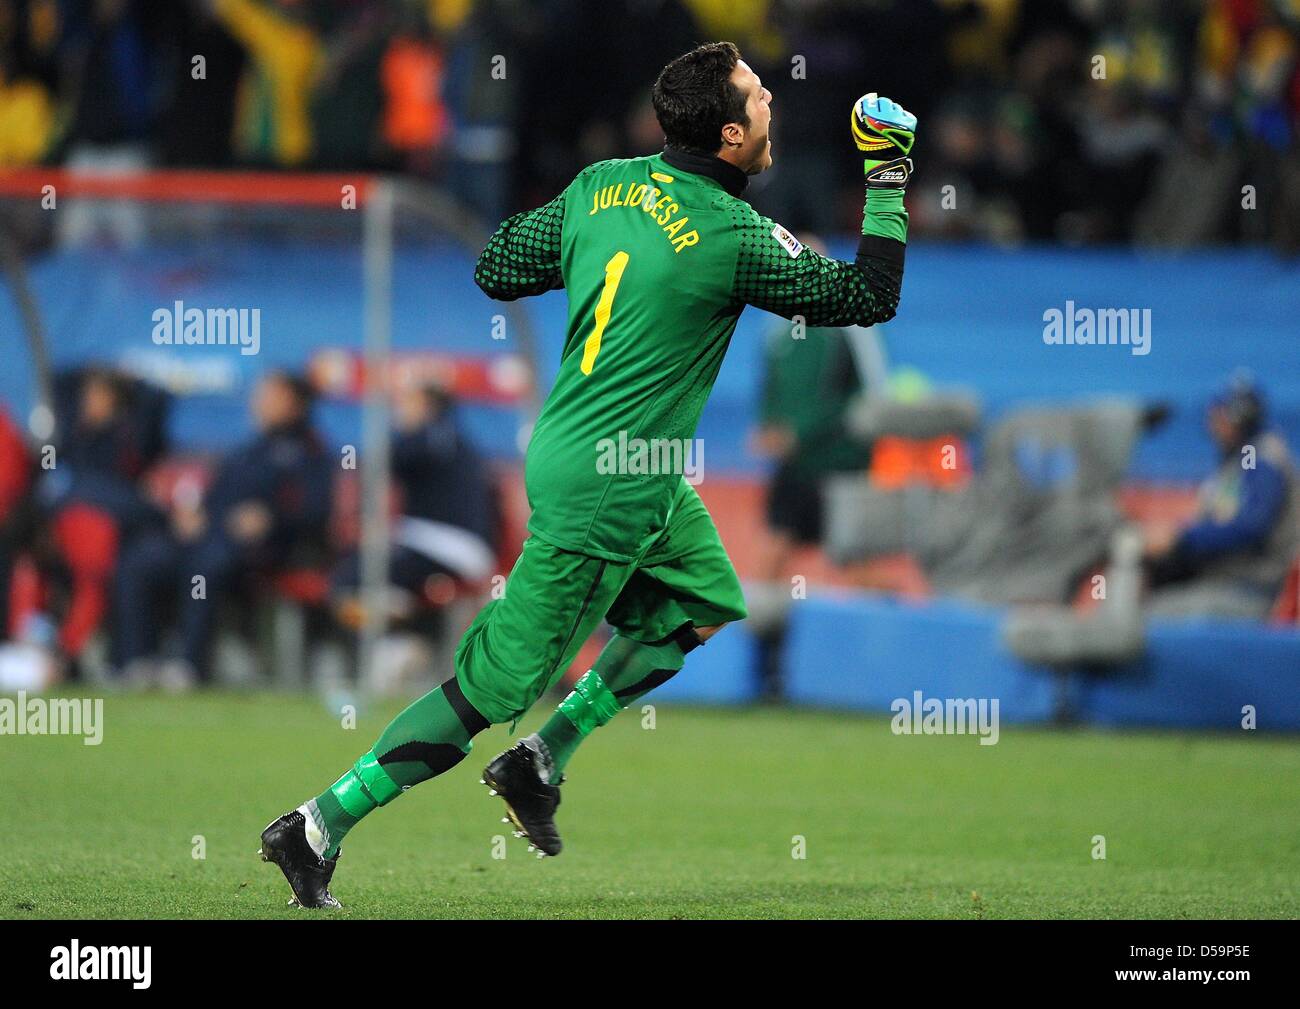 Brazil's goalkeeper Julio Cesar celebrates during the 2010 FIFA World Cup Round of Sixteen match between Brazil and Chile at the Ellis Park Stadium in Johannesburg, South Africa 28 June 2010. Photo: Marcus Brandt dpa - Please refer to http://dpaq.de/FIFA-WM2010-TC  +++(c) dpa - Bildfunk+++ Stock Photo